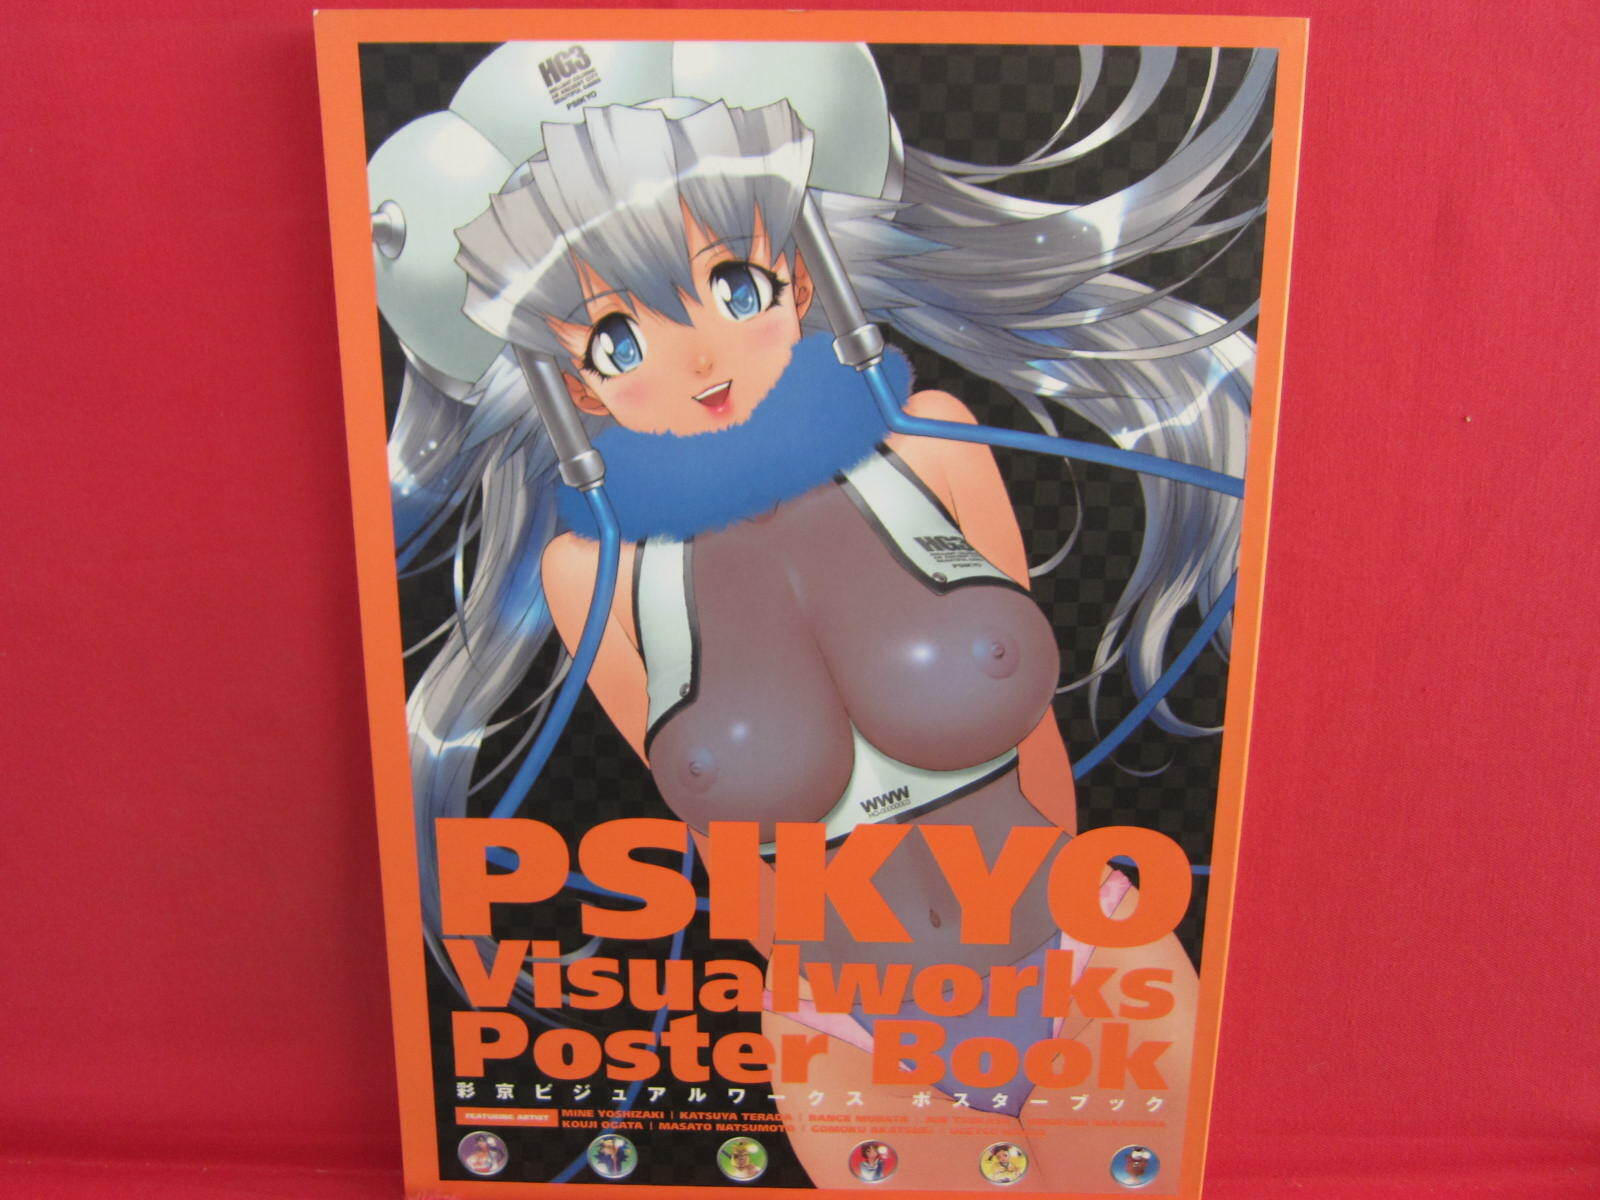 Psikyo visual Works poster book